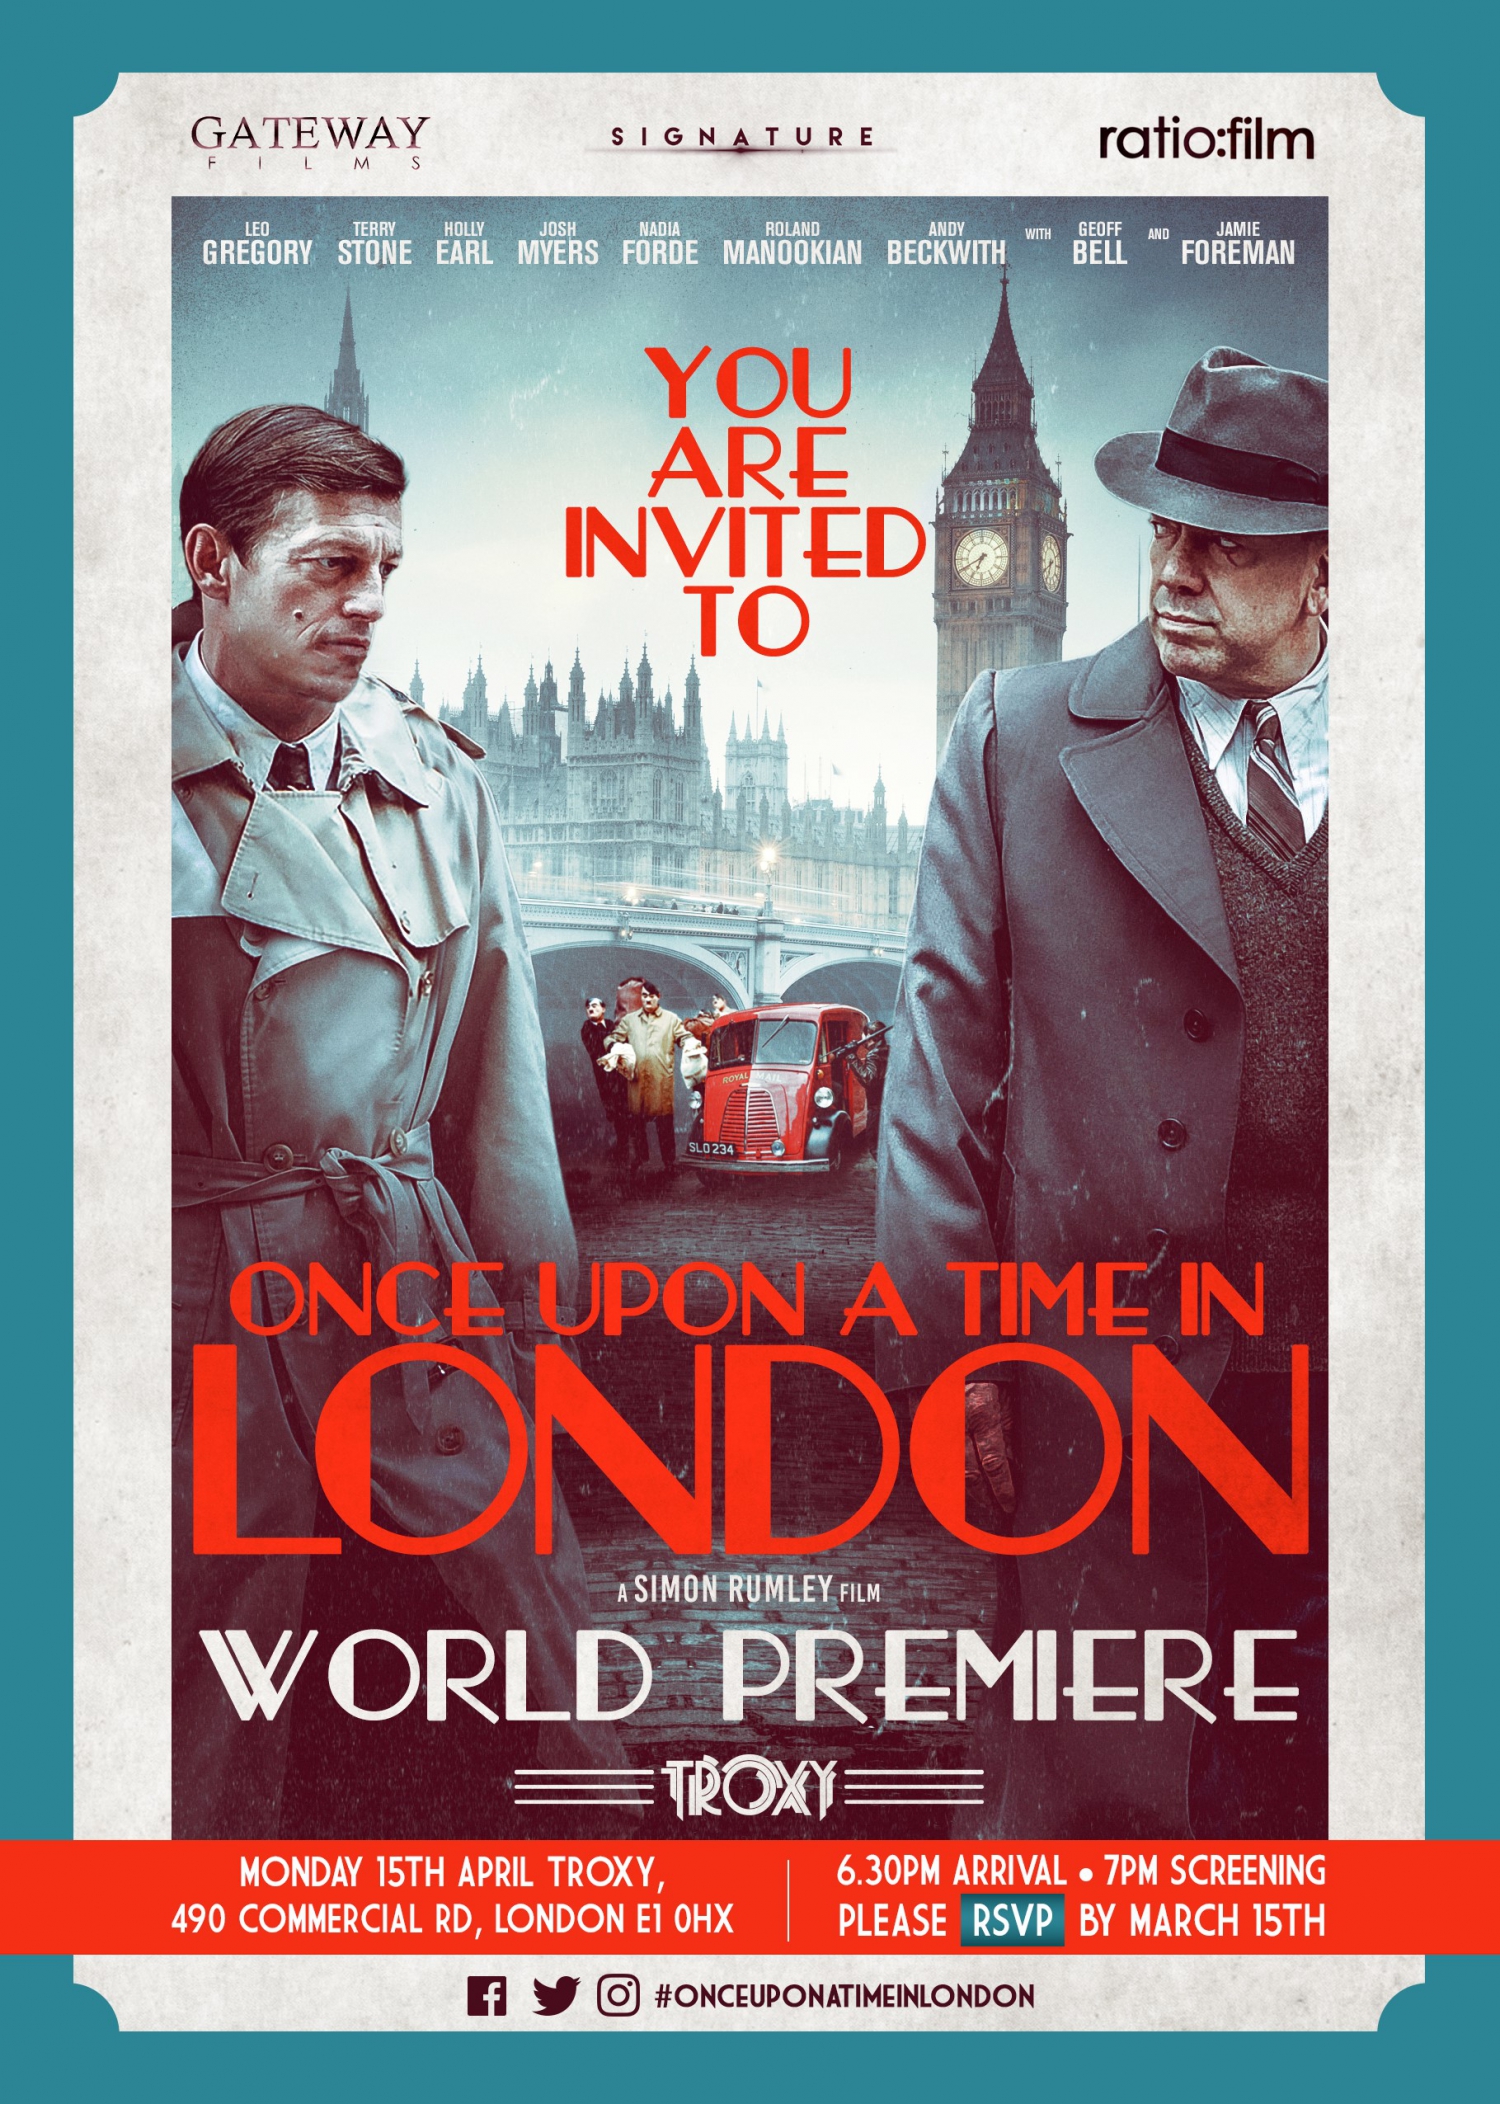 'Once upon a time in London' Film Premiere